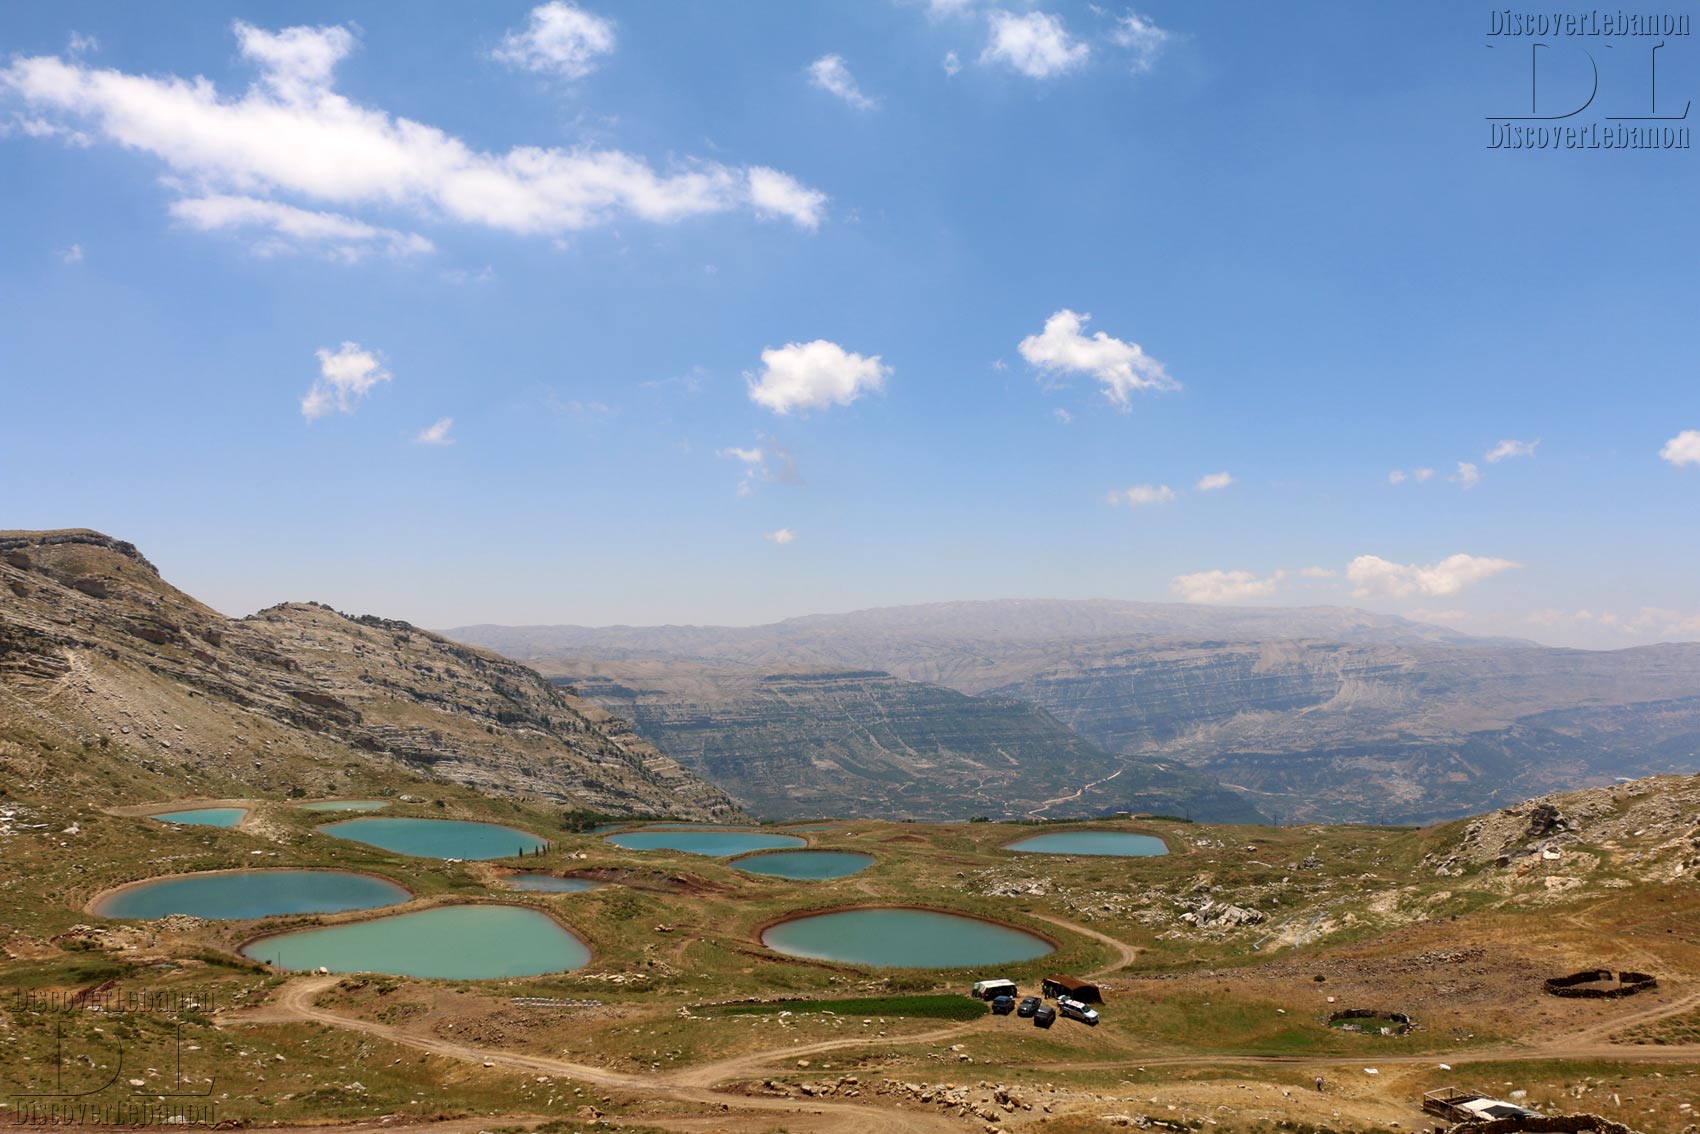 Sannine from Laklouk, Laqlouq high plateau mountains with lakes